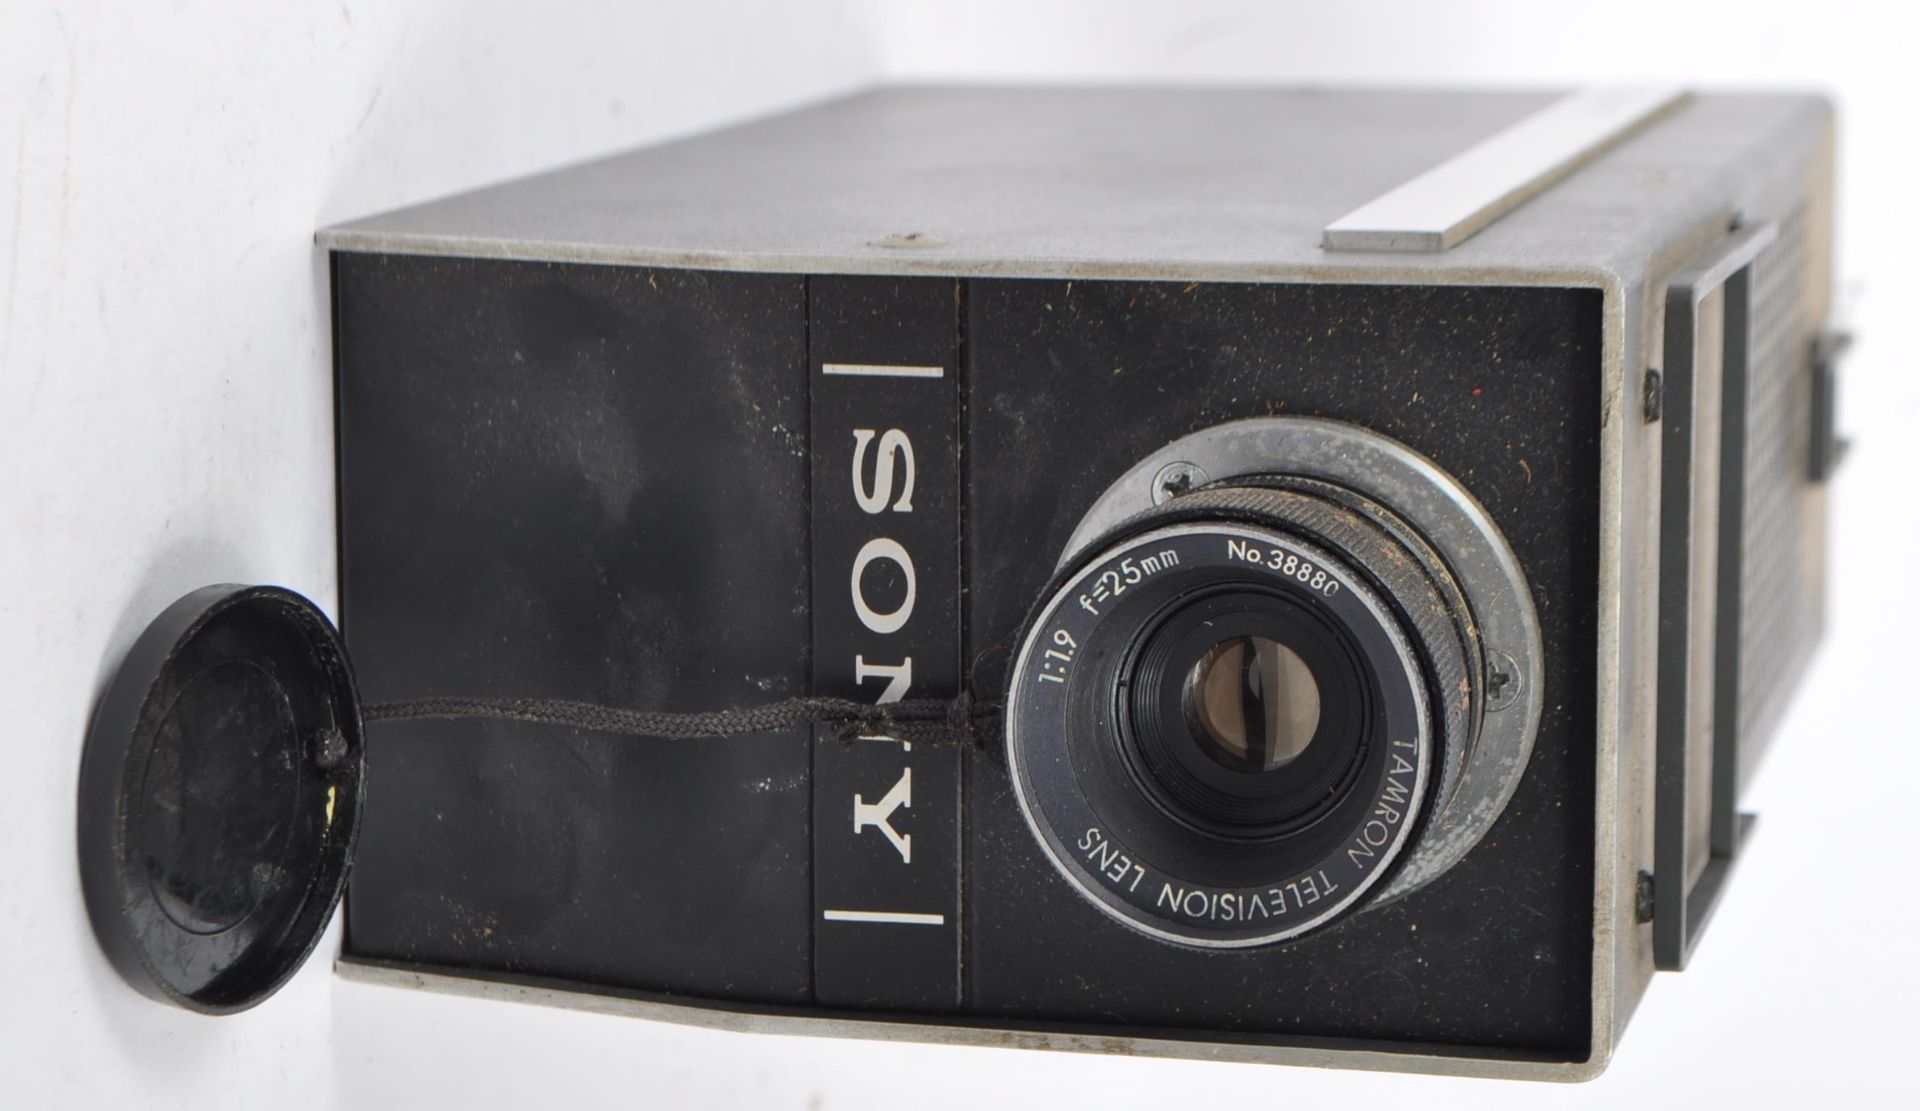 1966 VIDEO CAMERA WITH TAMRON TELEVISION LENS BY SONY CORP - Image 3 of 5